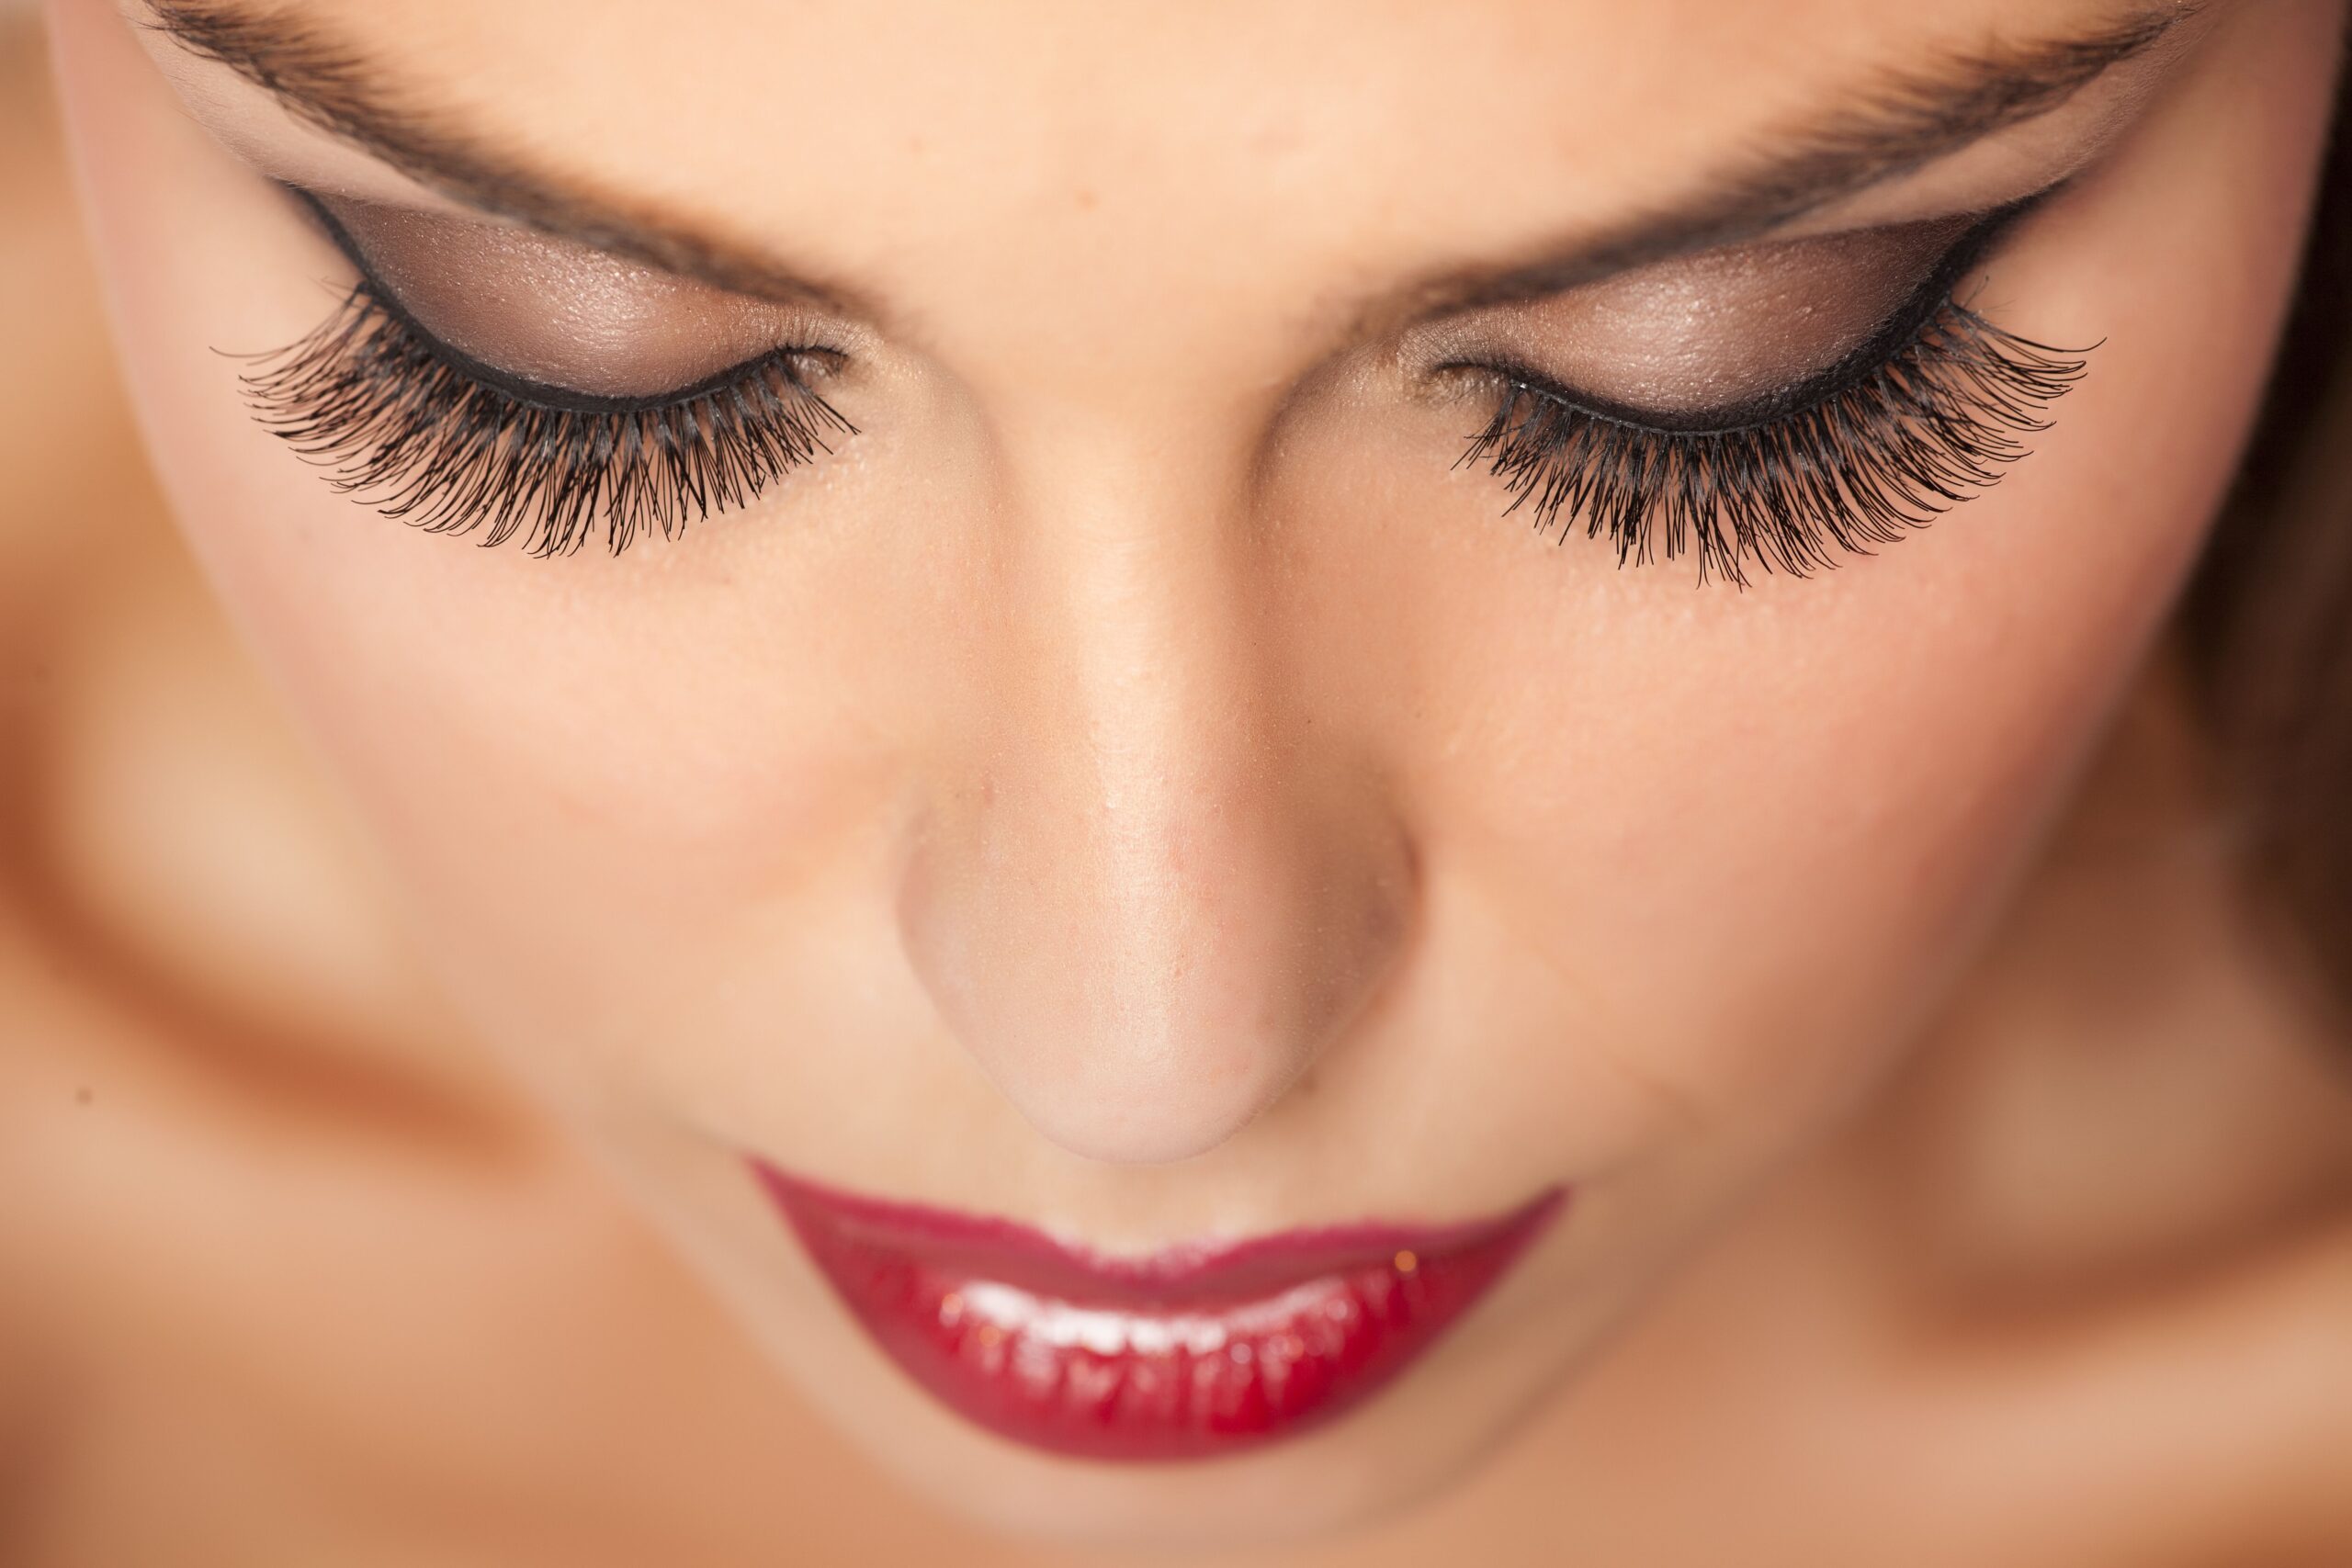 A woman with long, full eyelashes